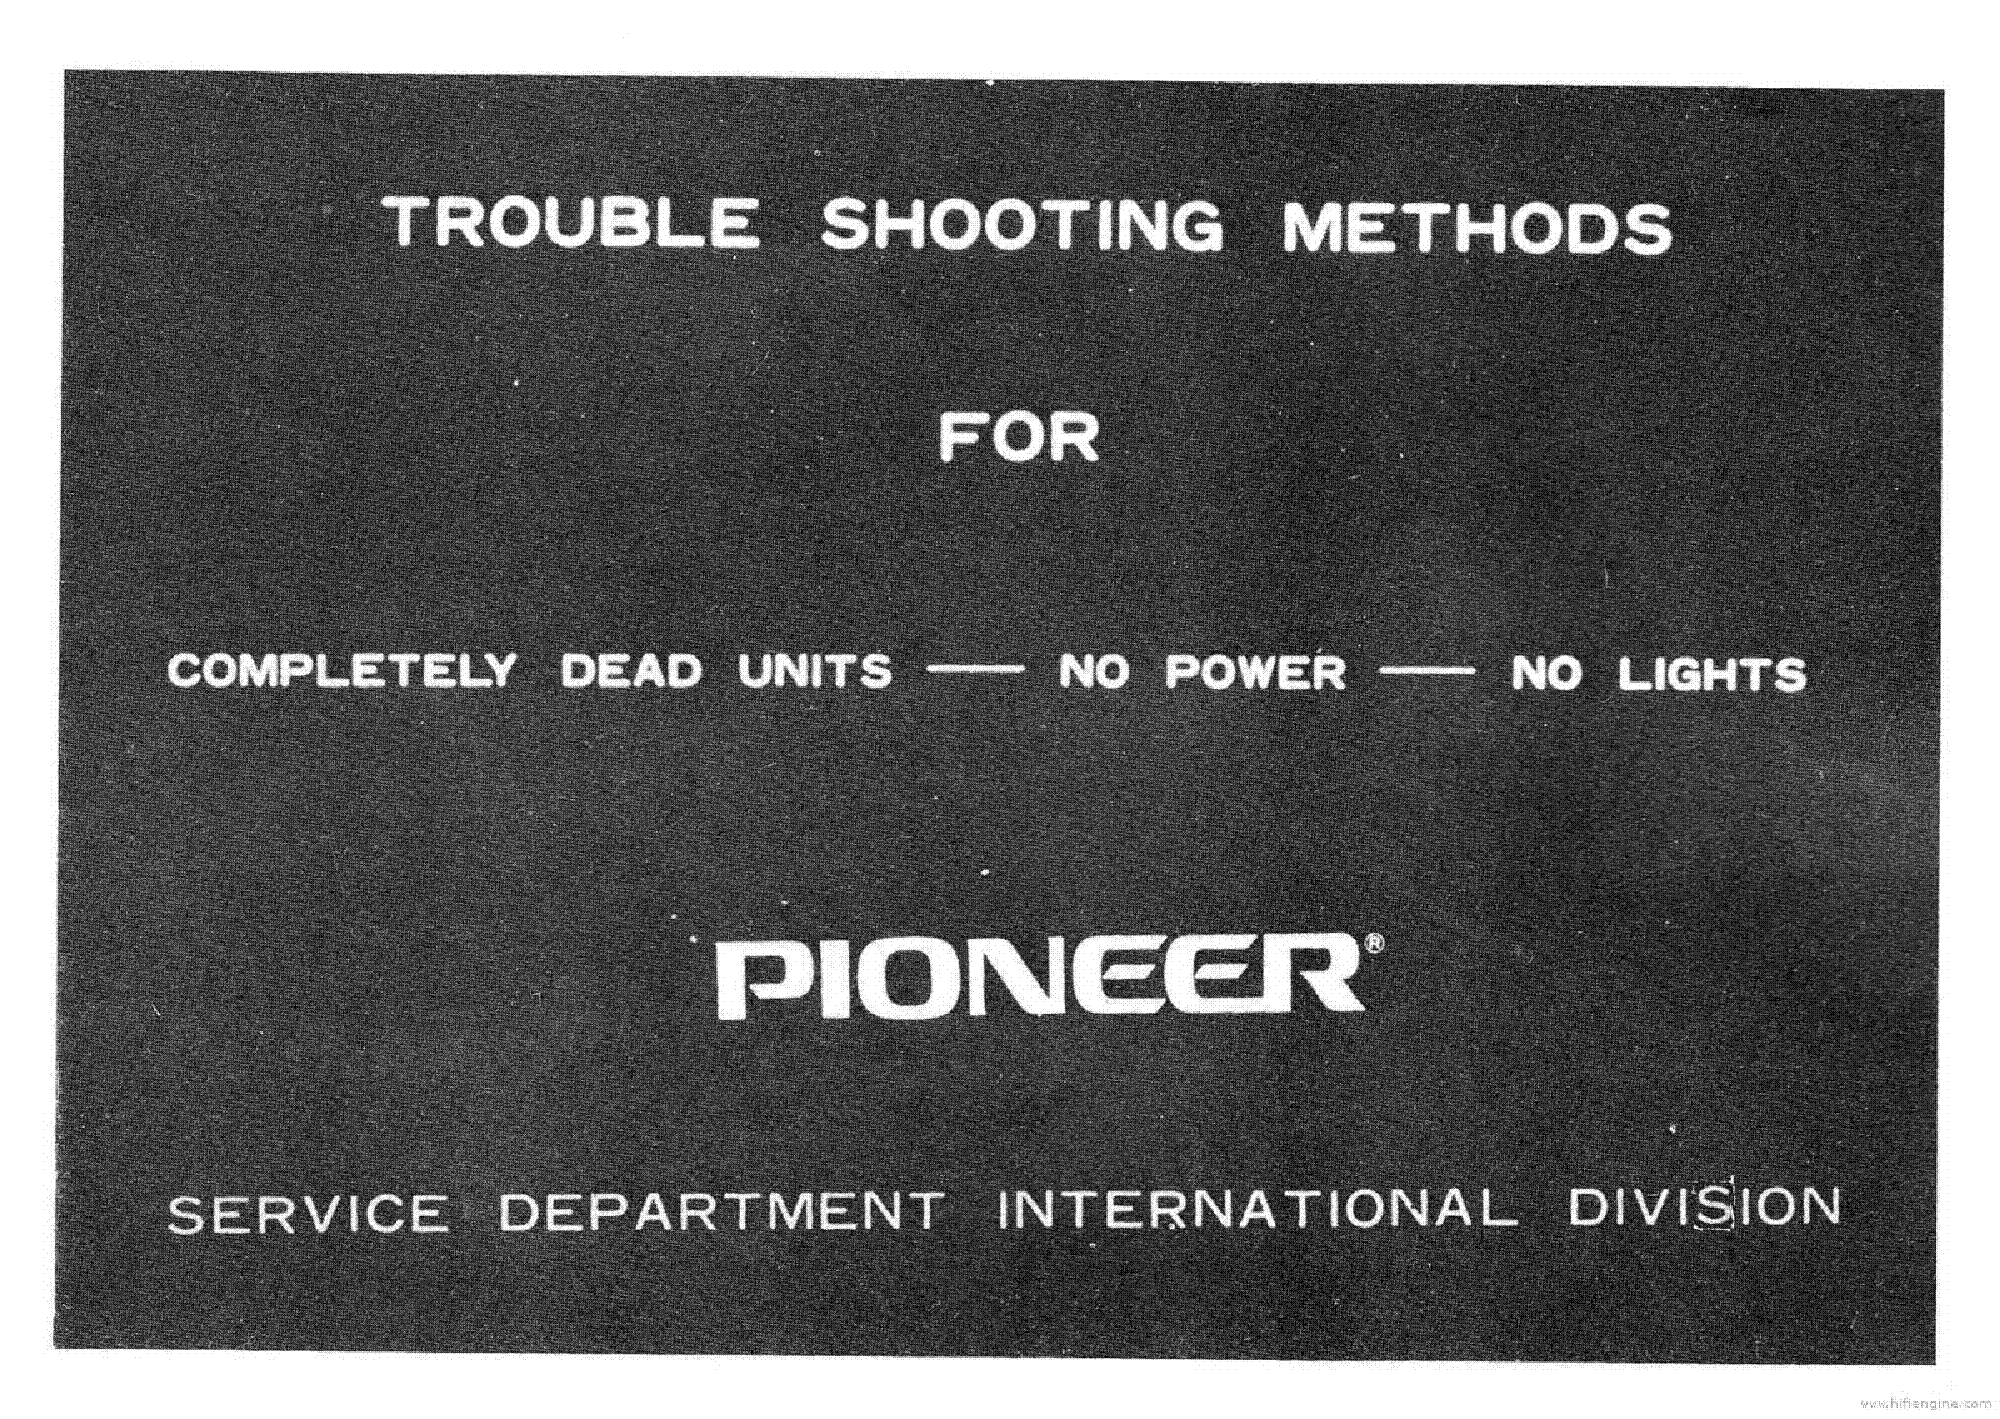 PIONEER TROUBLESHOOTING COMPLETELY DEAD UNITS service manual (2nd page)